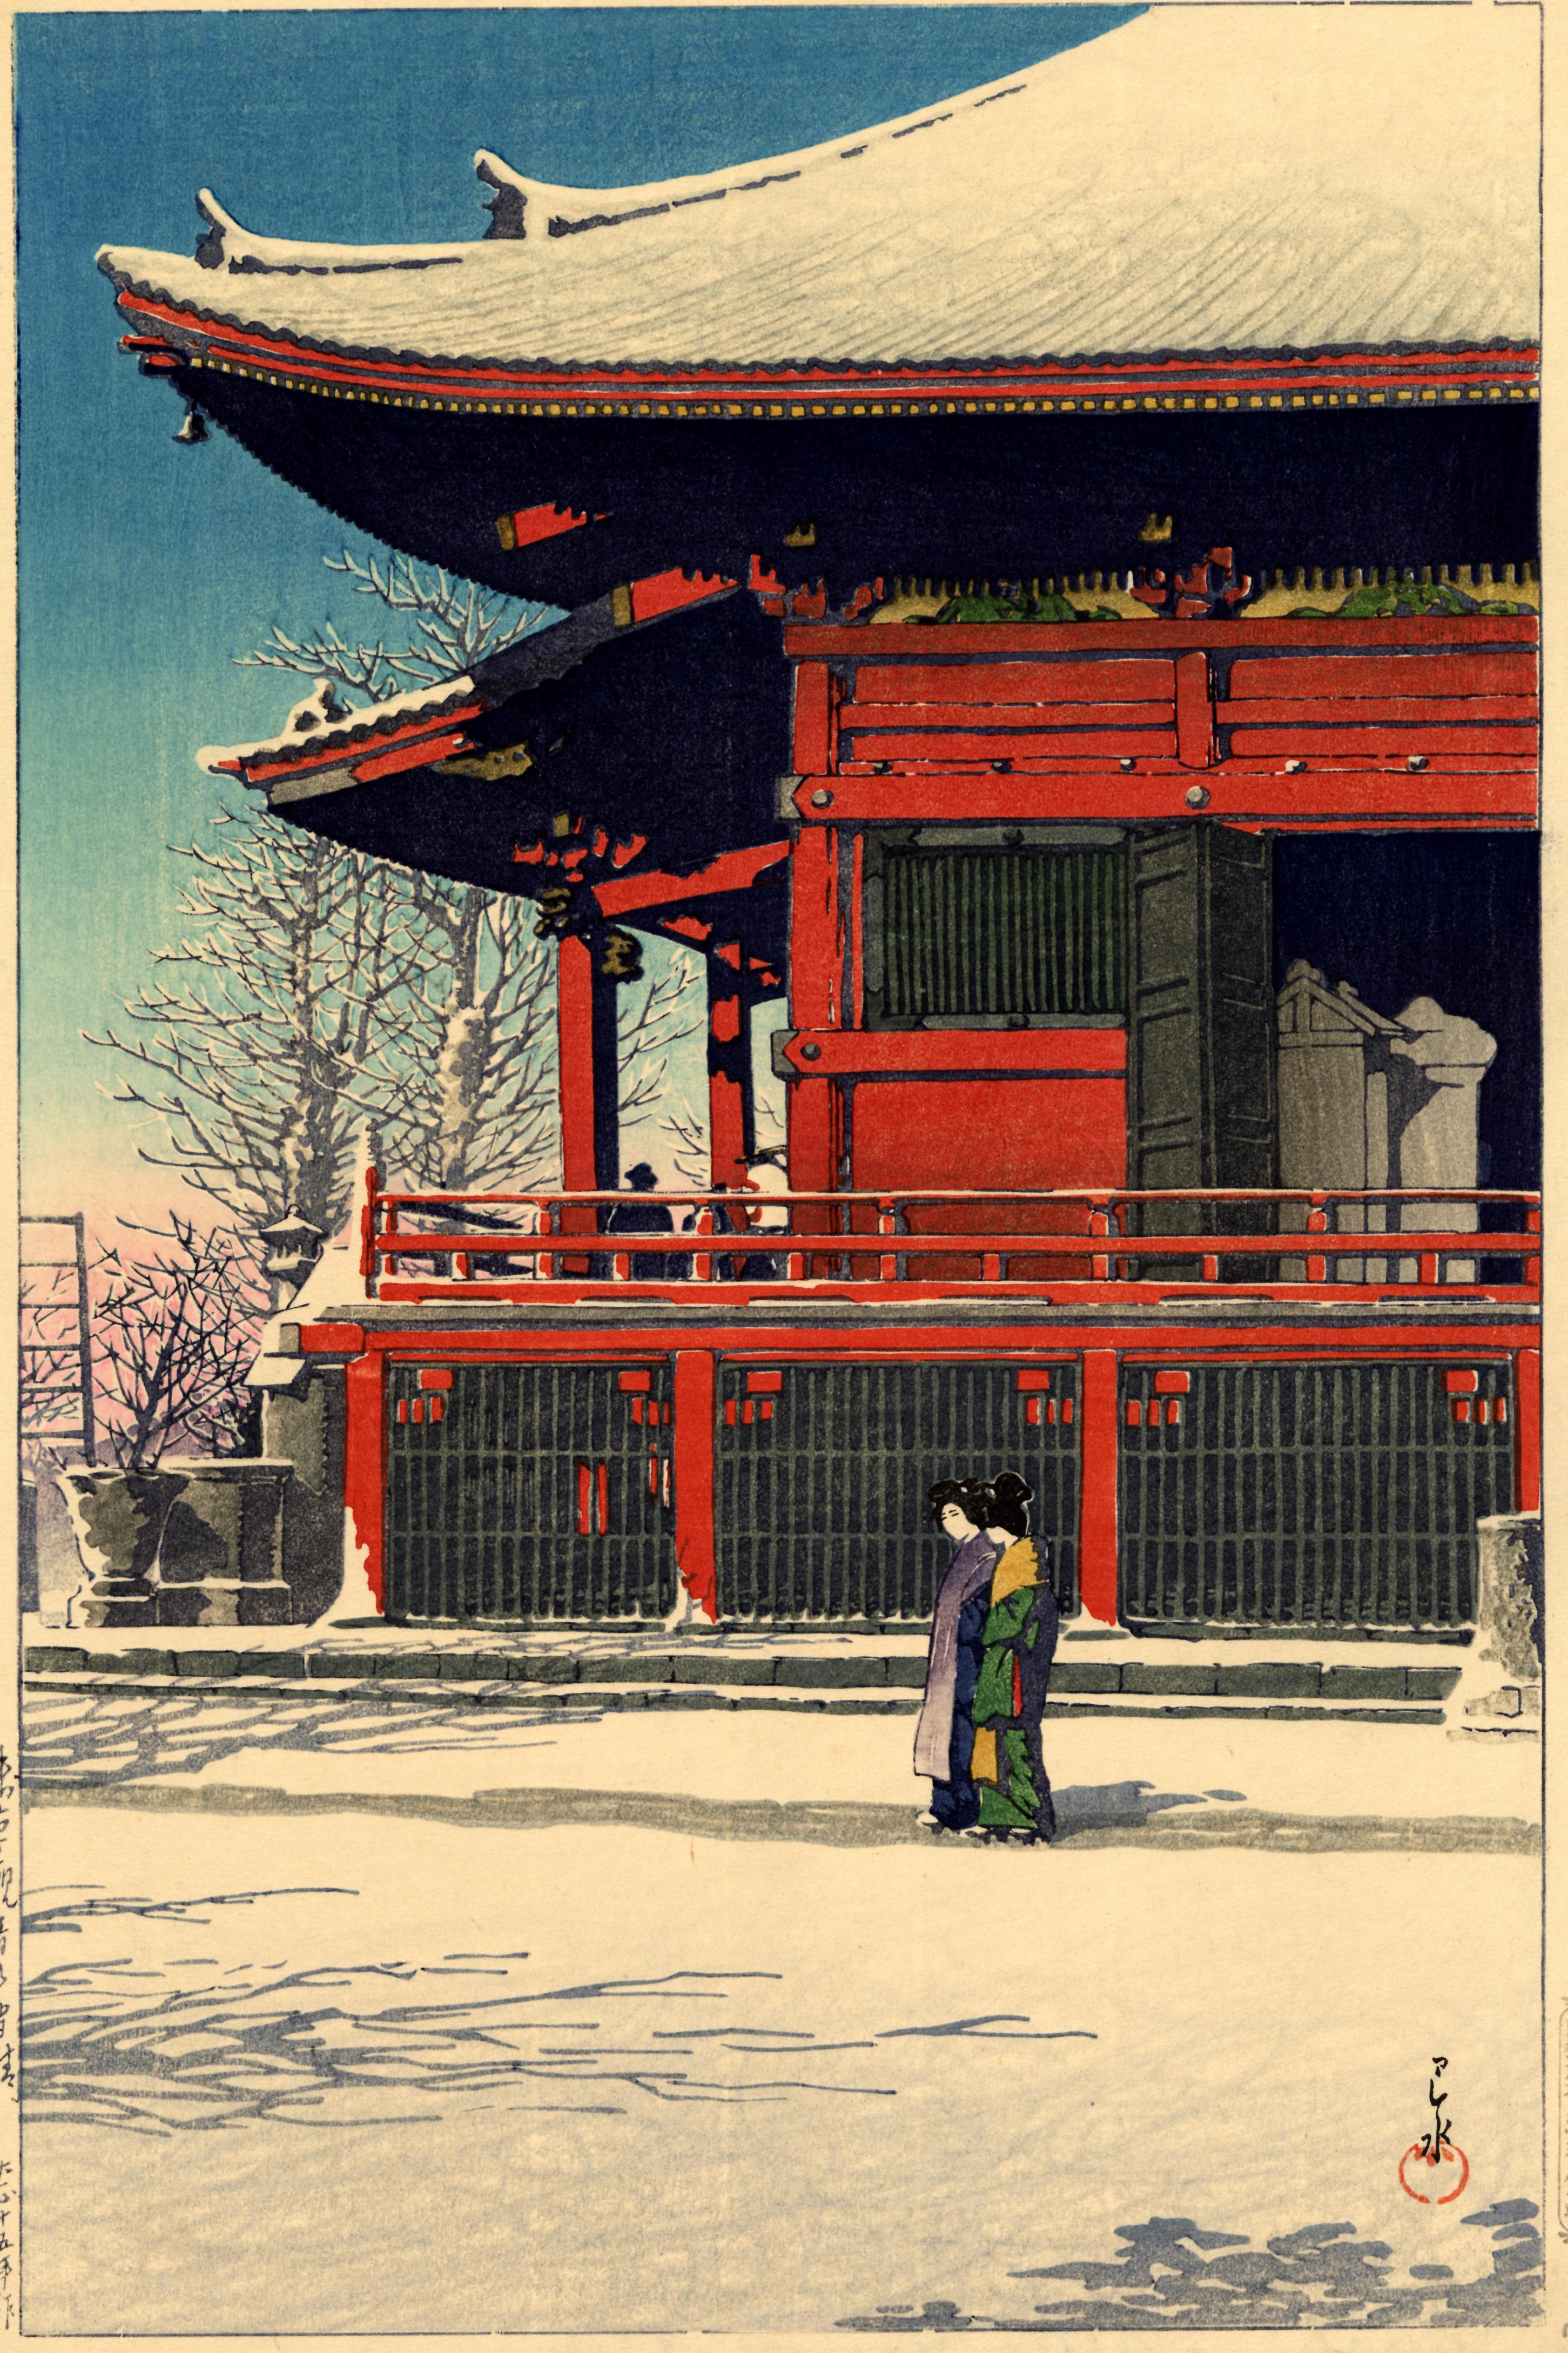 Two beauties in traditional kimono admire the beauty of the crimson Asakusa Kannon Temple in the clear light that follows a snowfall. Asakusa Kannon no yukibare. Portrait of an unusually quiet moment in the normally bustling Asakusa Temple grounds.